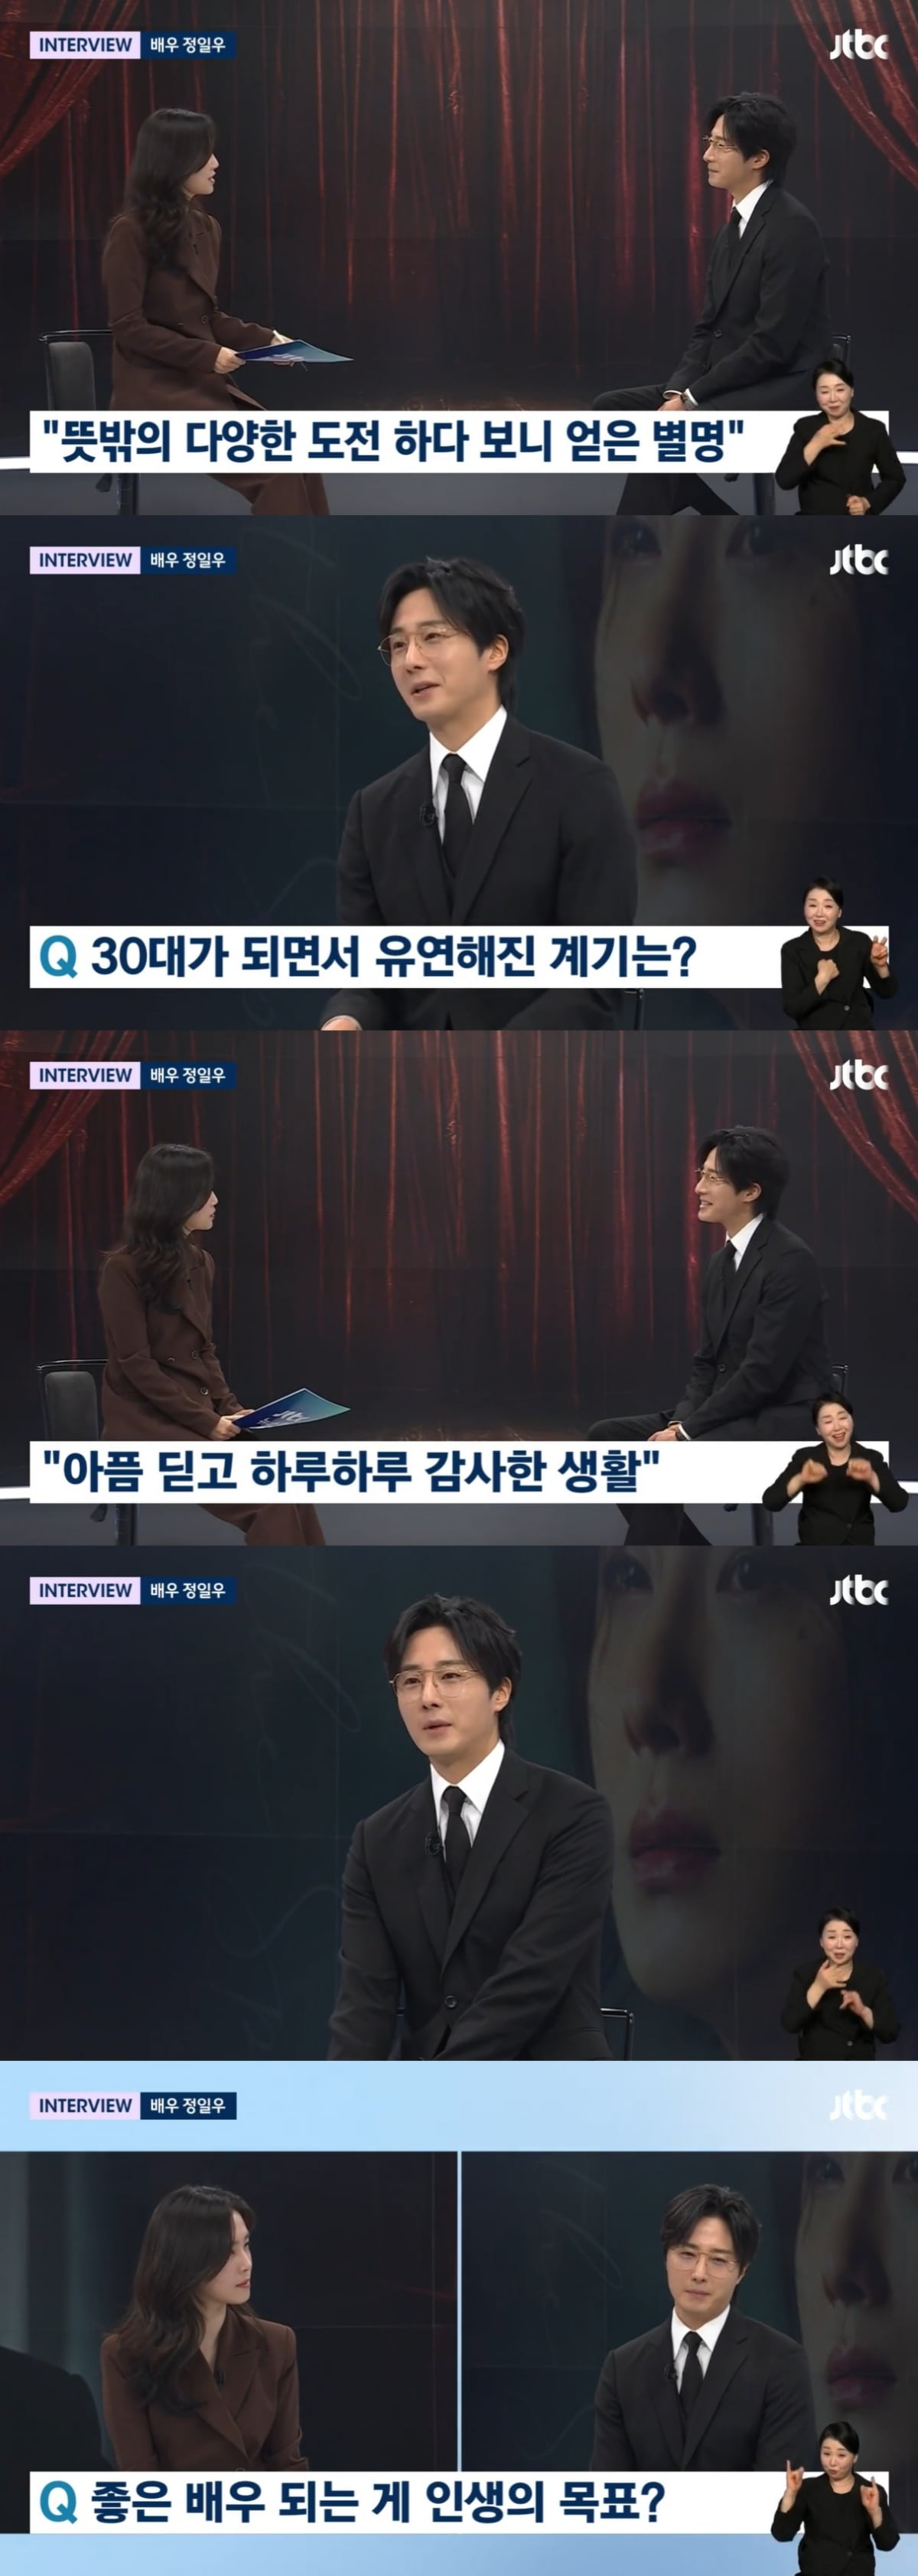 Jung Il-woo "Fighting with cerebral aneurysm is the biggest turning point"